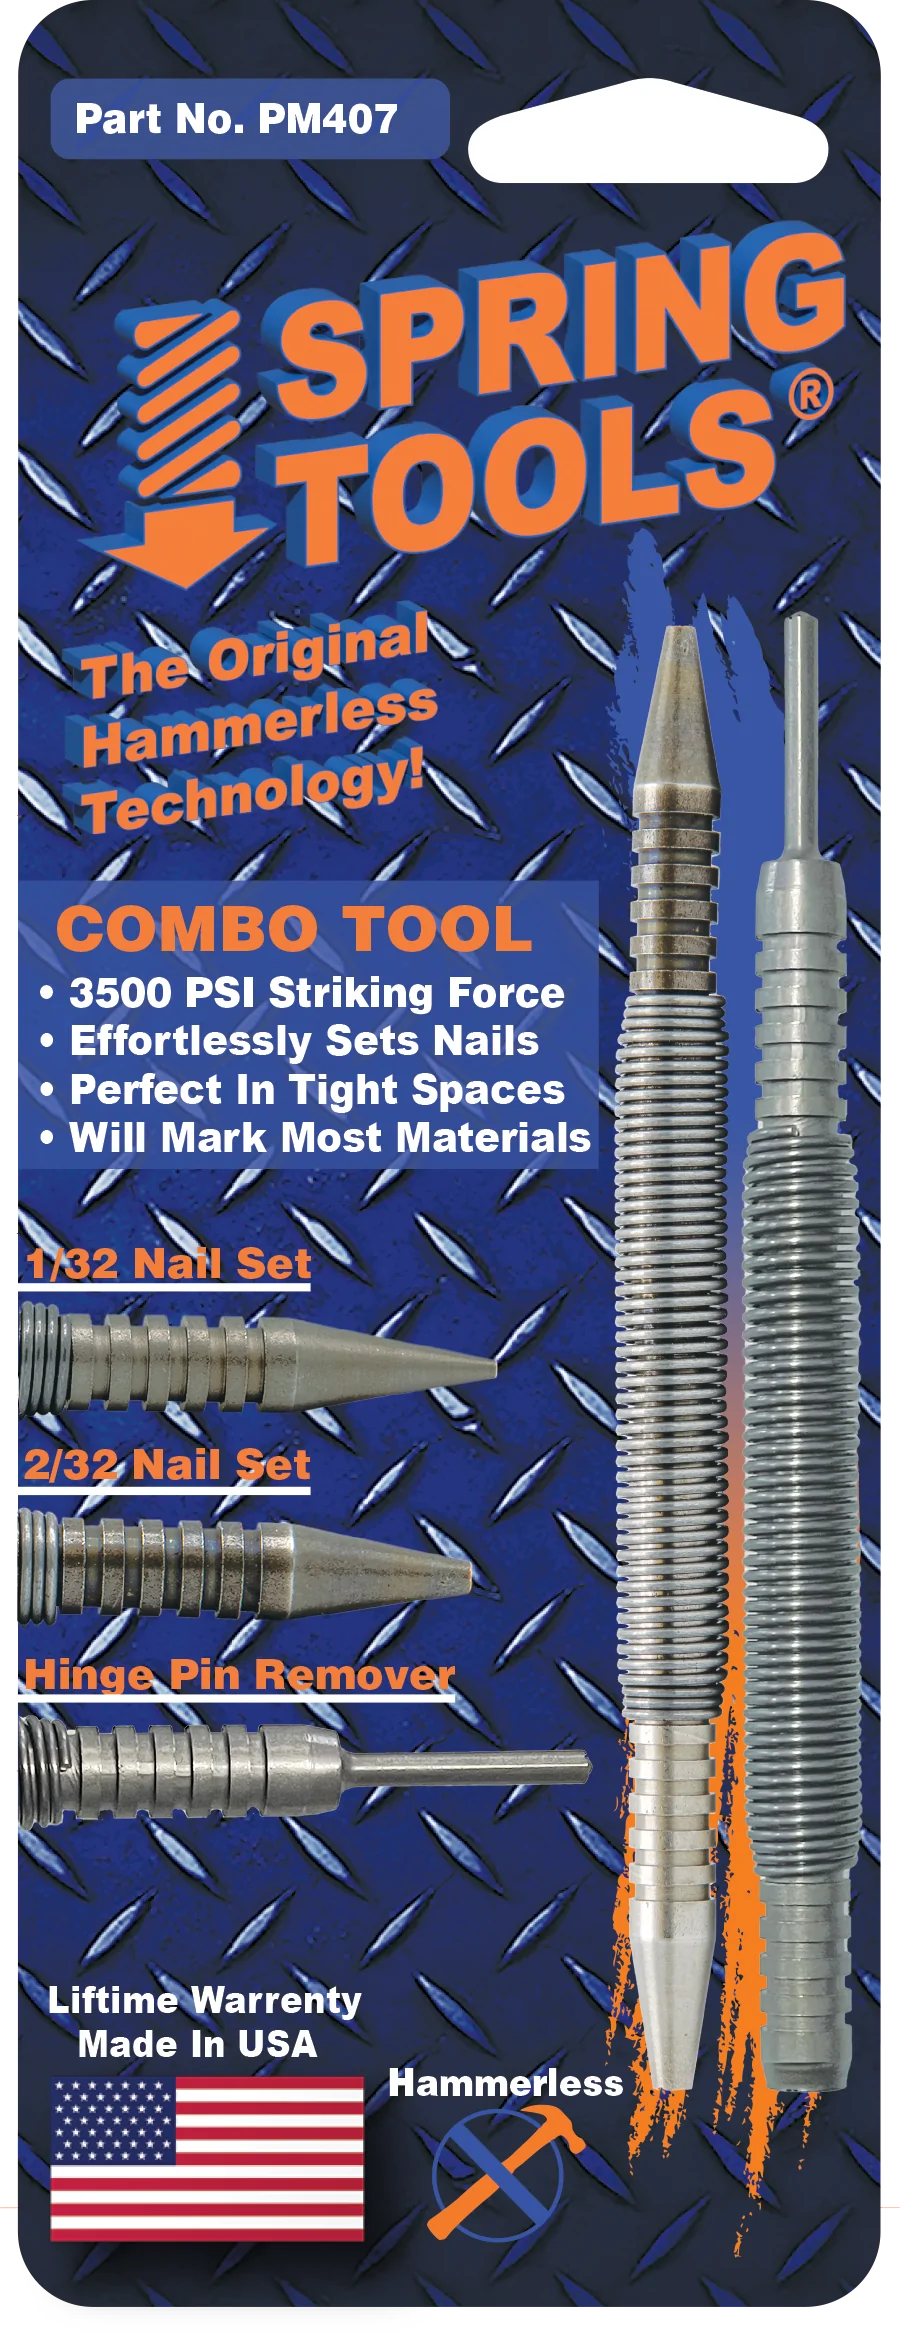 This PM407 tool set includes Nail Set Tool - 1/32" (#1) & 1/16" (#2) - 32R12-1 and Hammerless door pin removal tool - 48R24-1. 3500lbs of impact striking force at your finger tips!